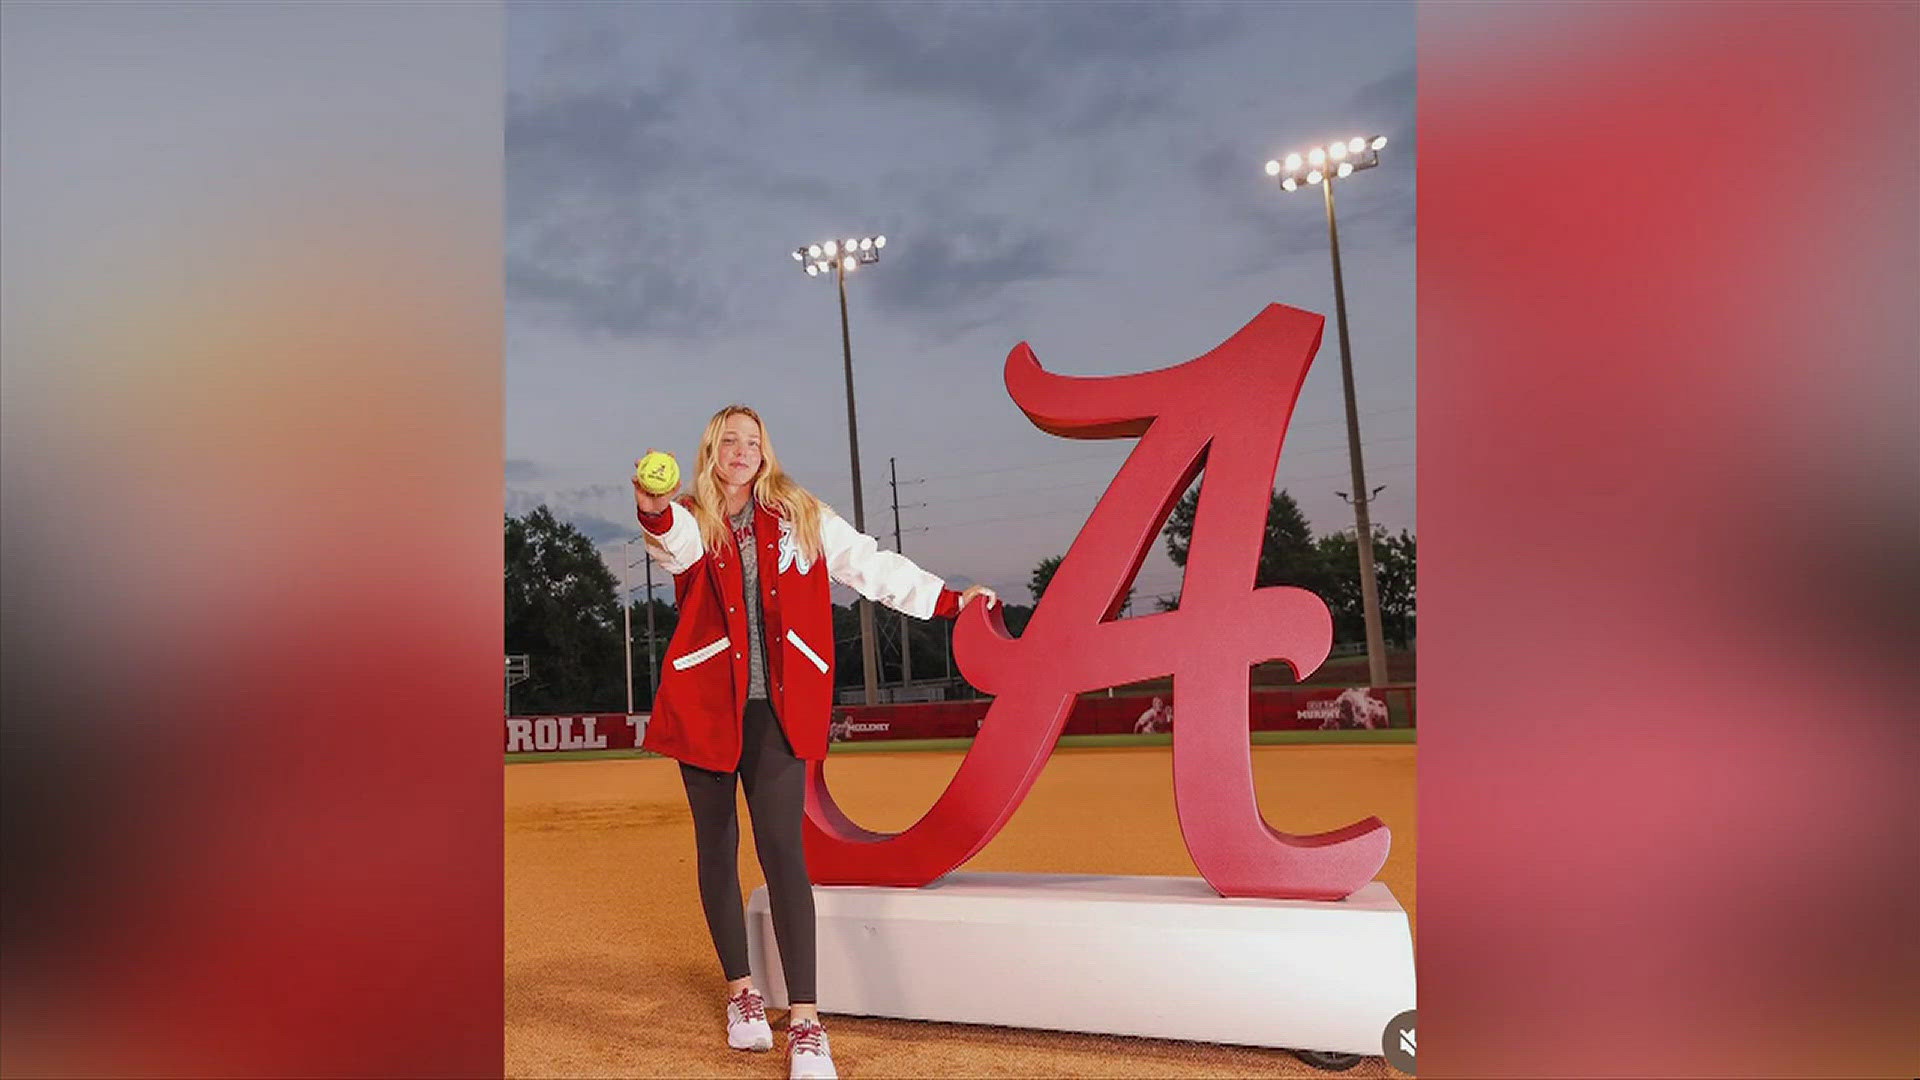 The Crimson Tide picked up its second addition from the transfer portal this week in Brooke Ellestad